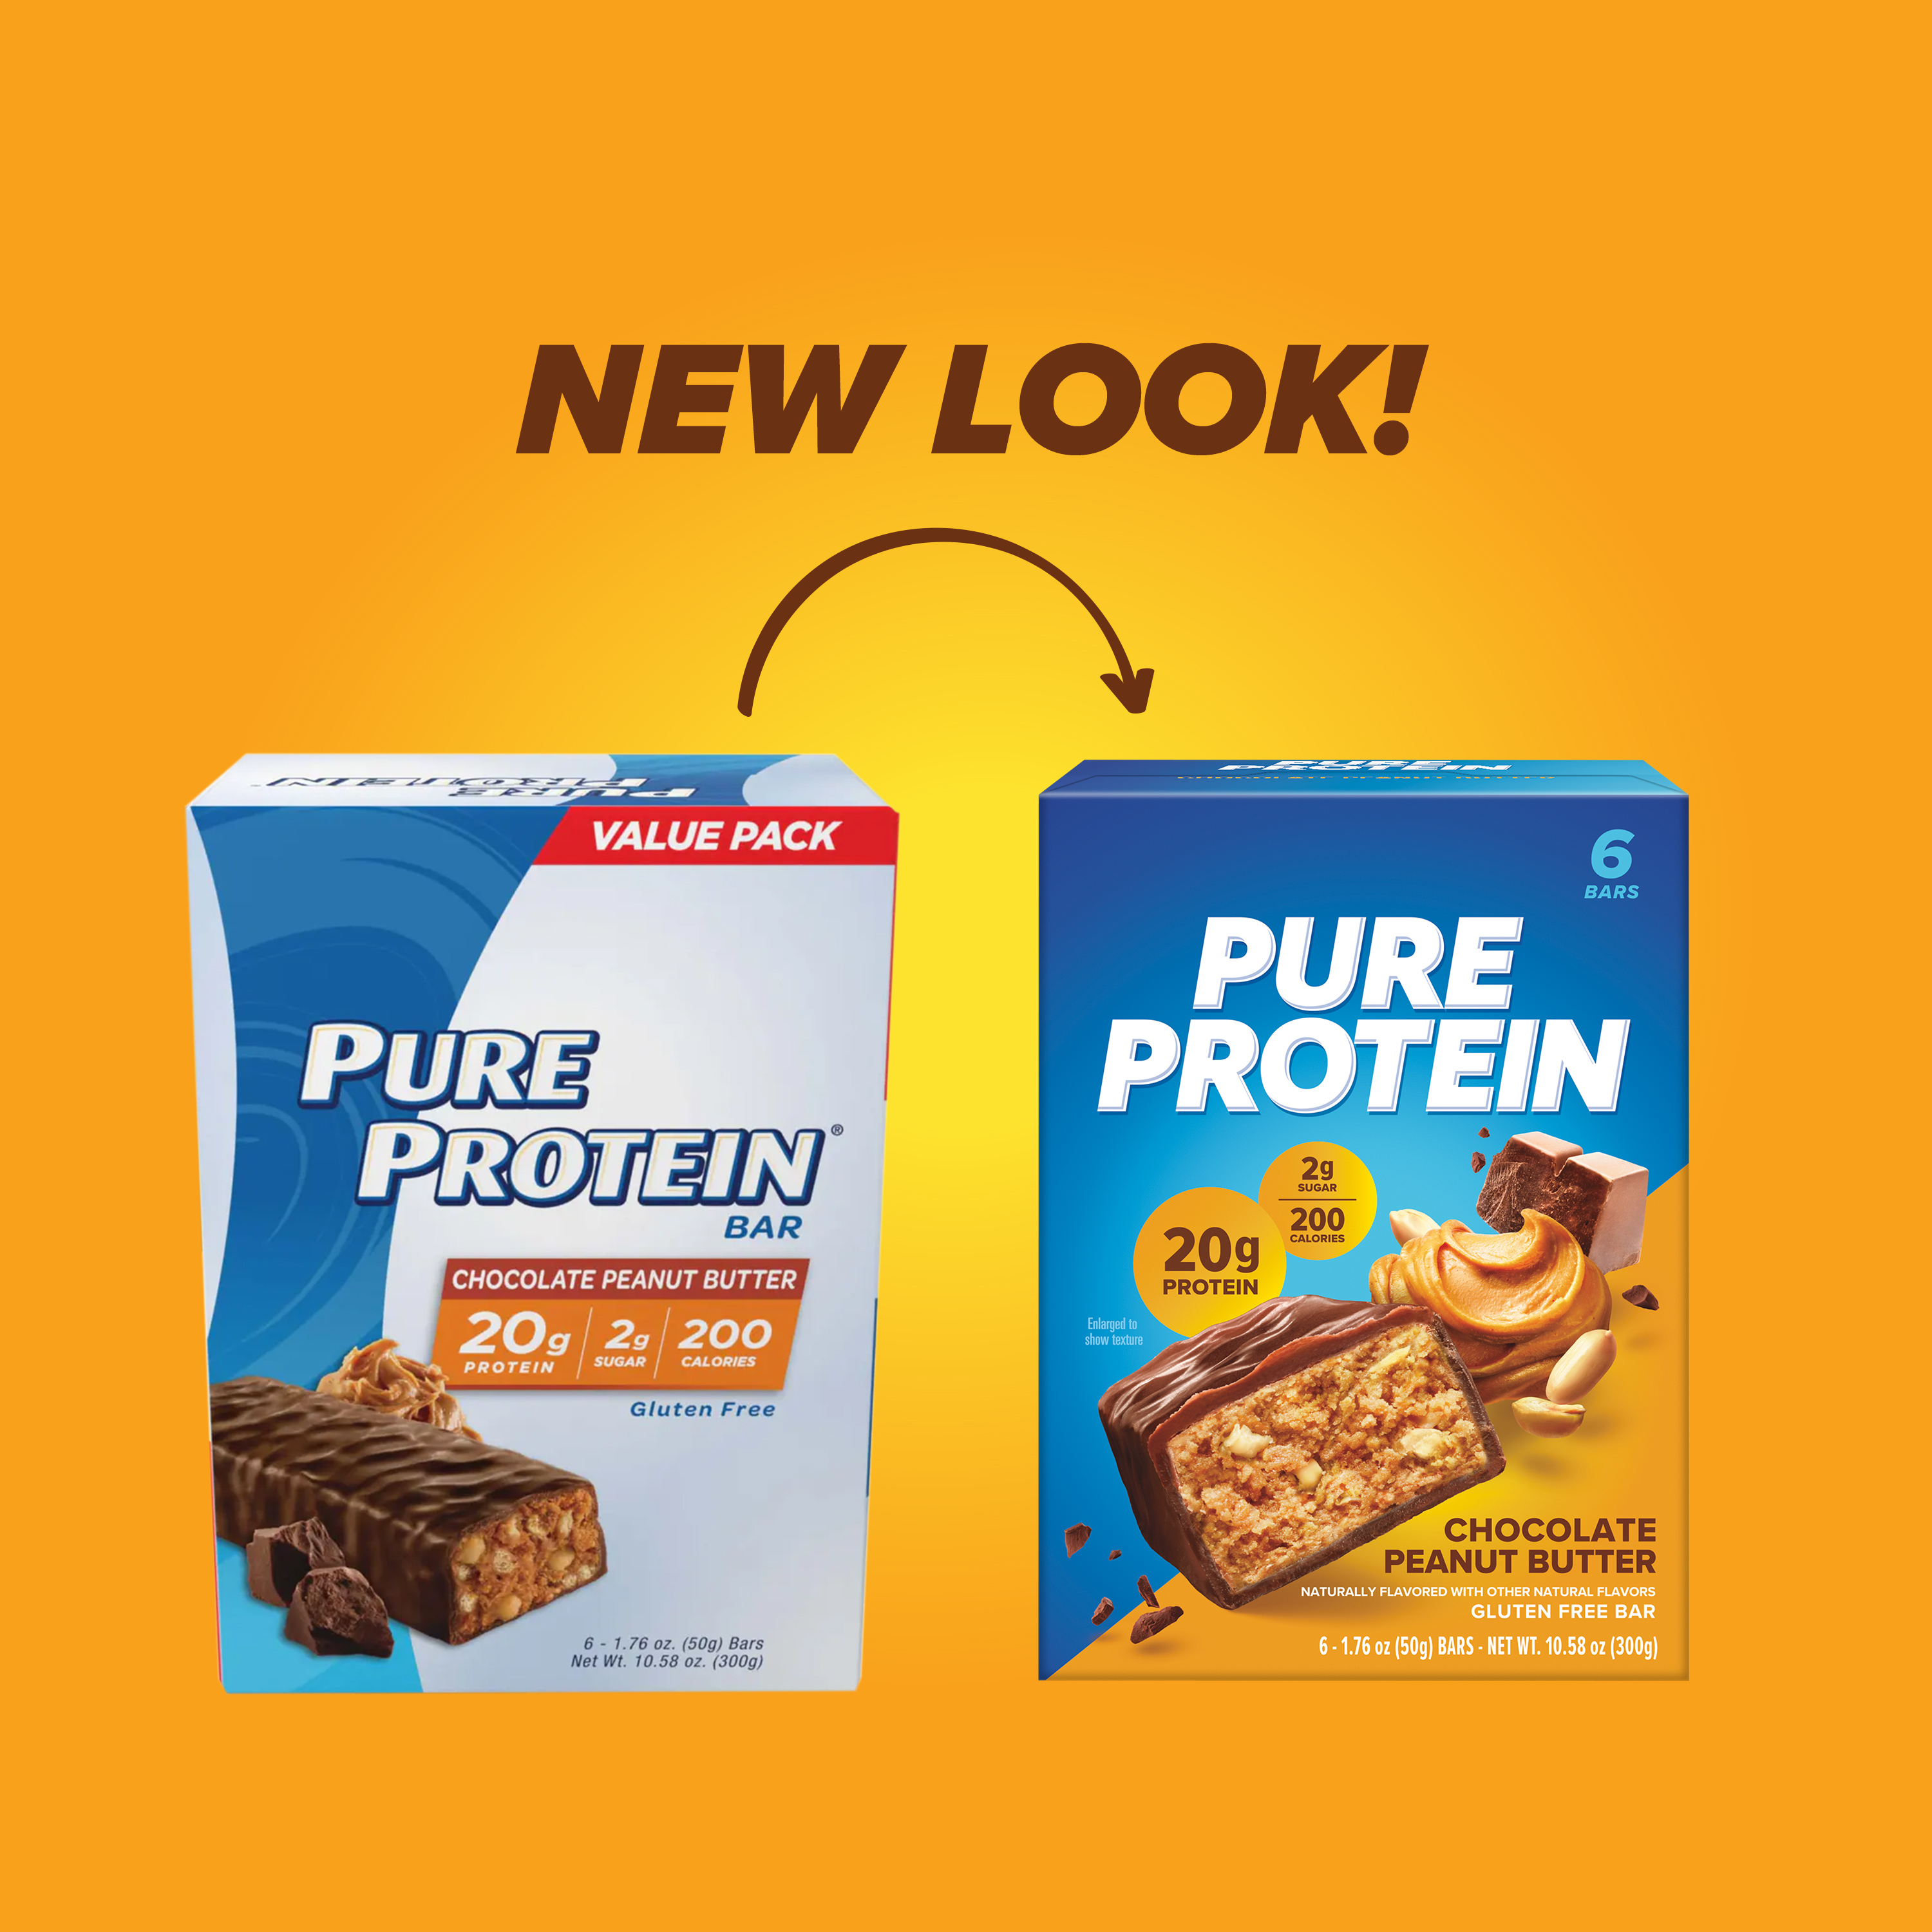 Pure Protein Bars, Chocolate Peanut Butter, 20g Protein, Gluten Free, 1.76 oz, 6 Ct - image 4 of 6